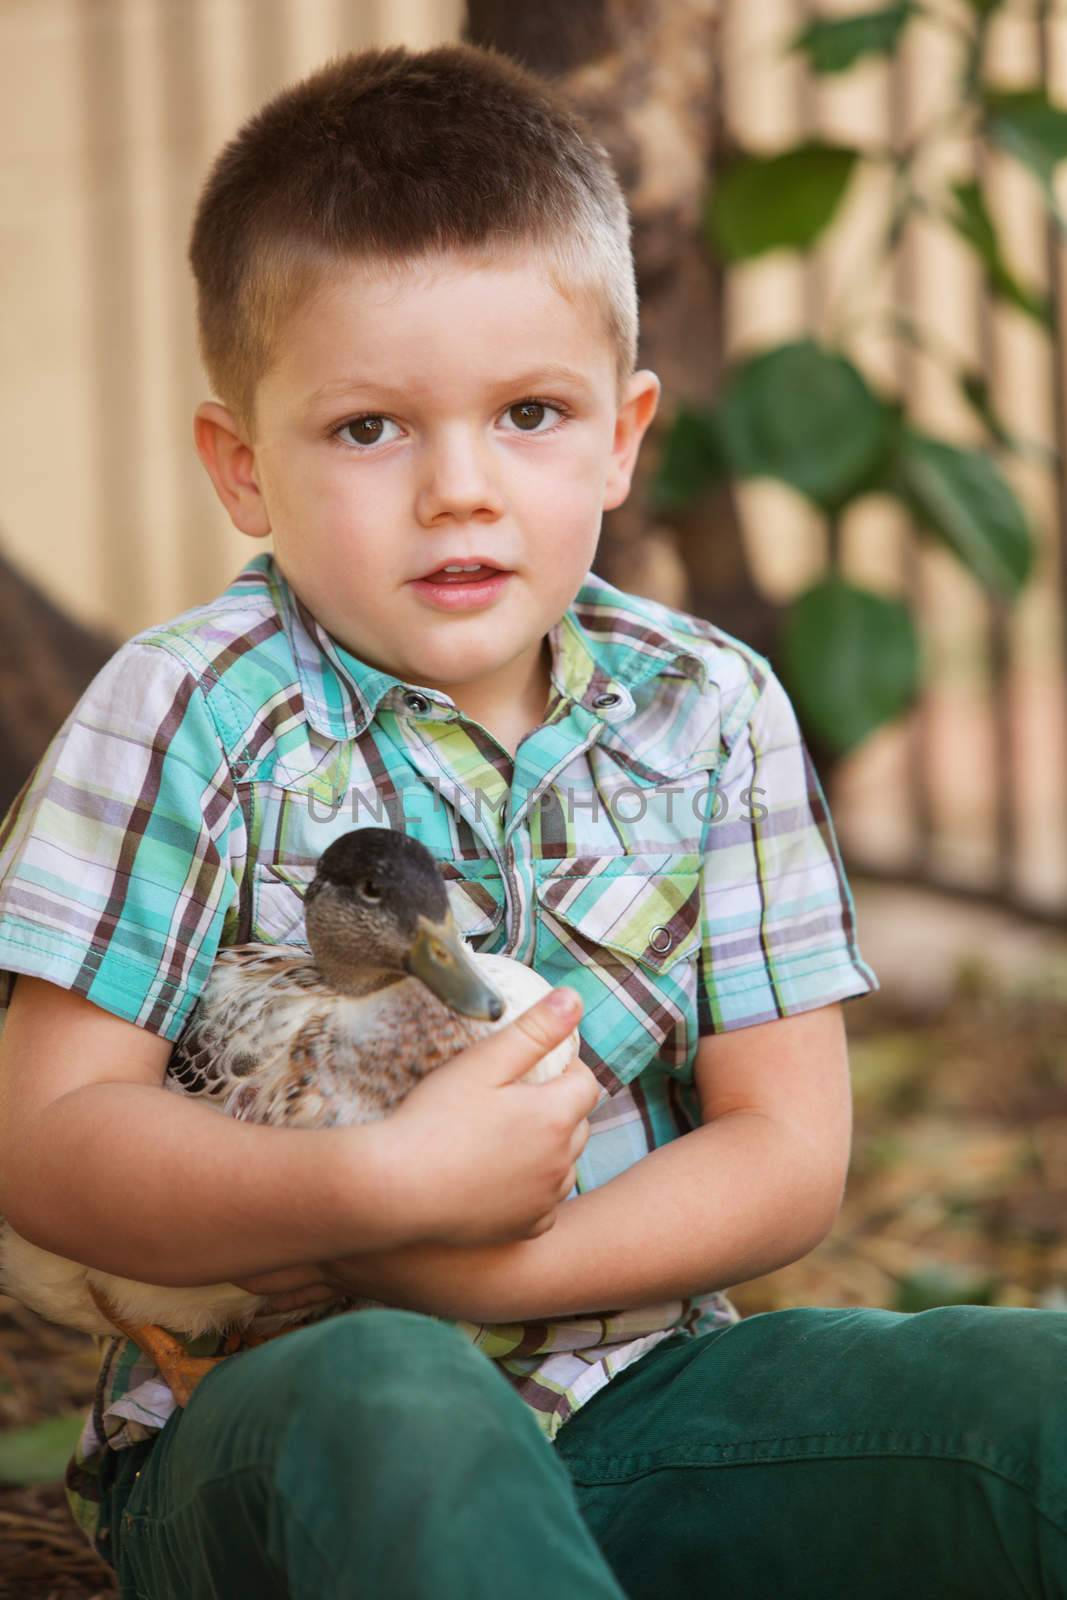 Single smiling child holding a duck outdoors